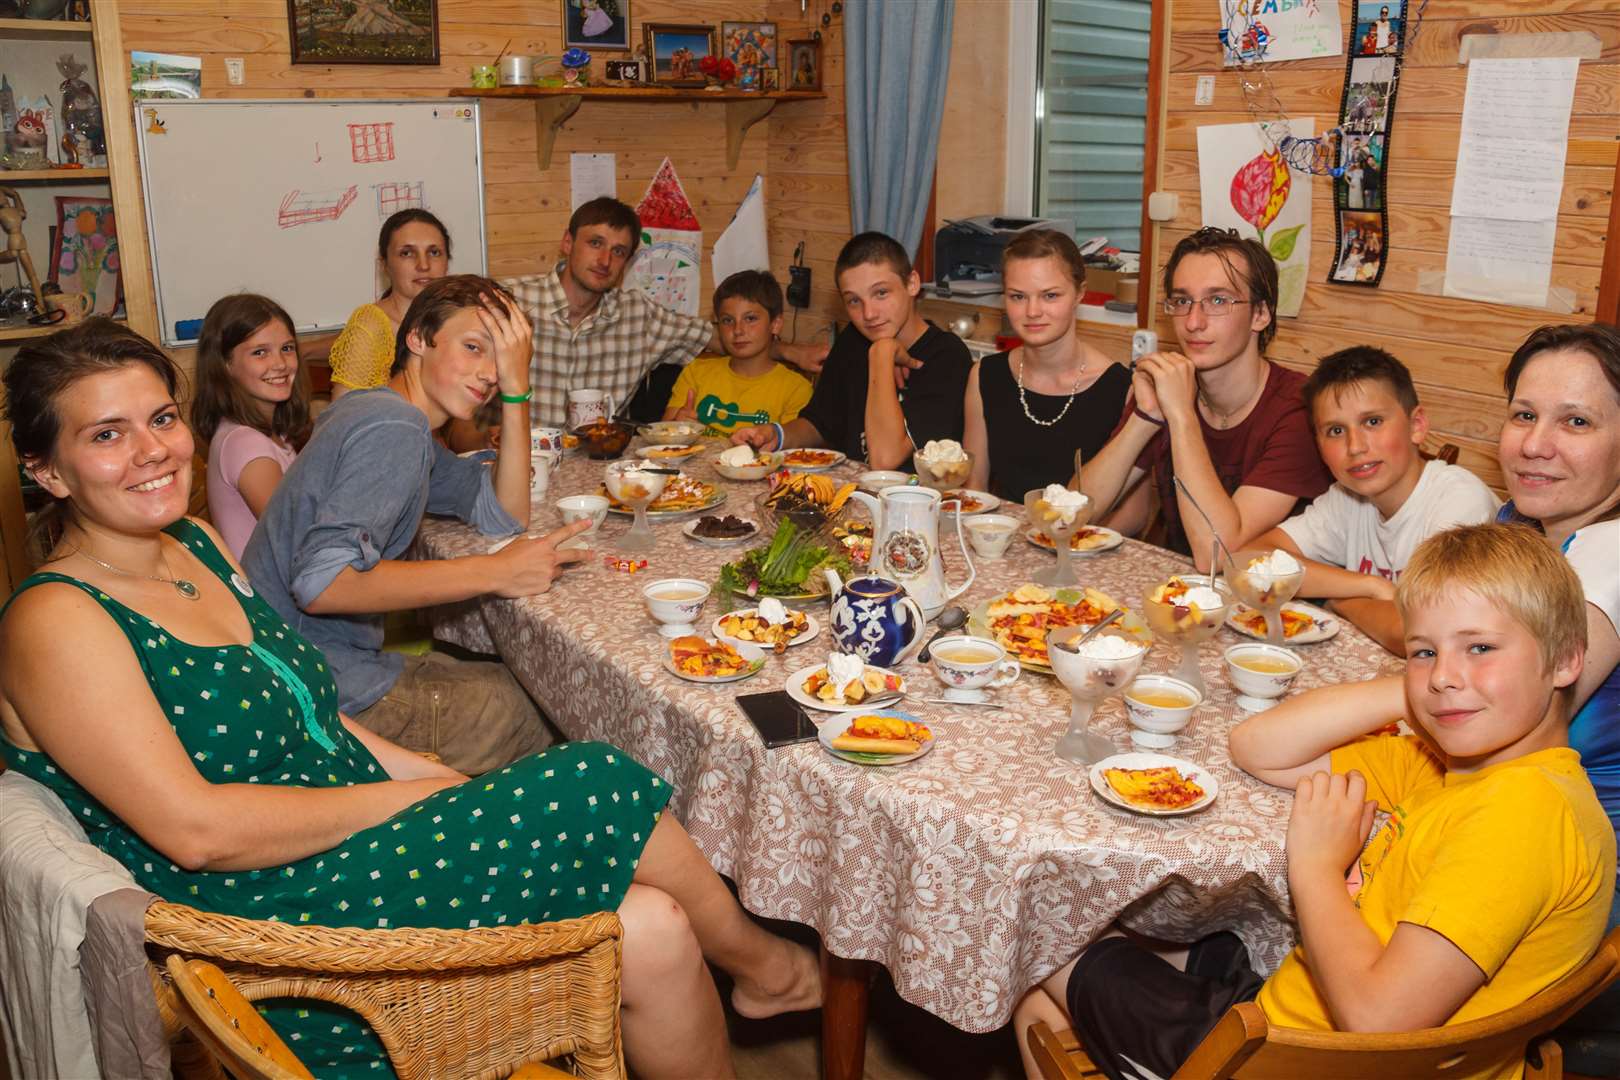 A pizza night birthday party for three foster families in the Orion community, south of Moscow, which Ecologia supports.